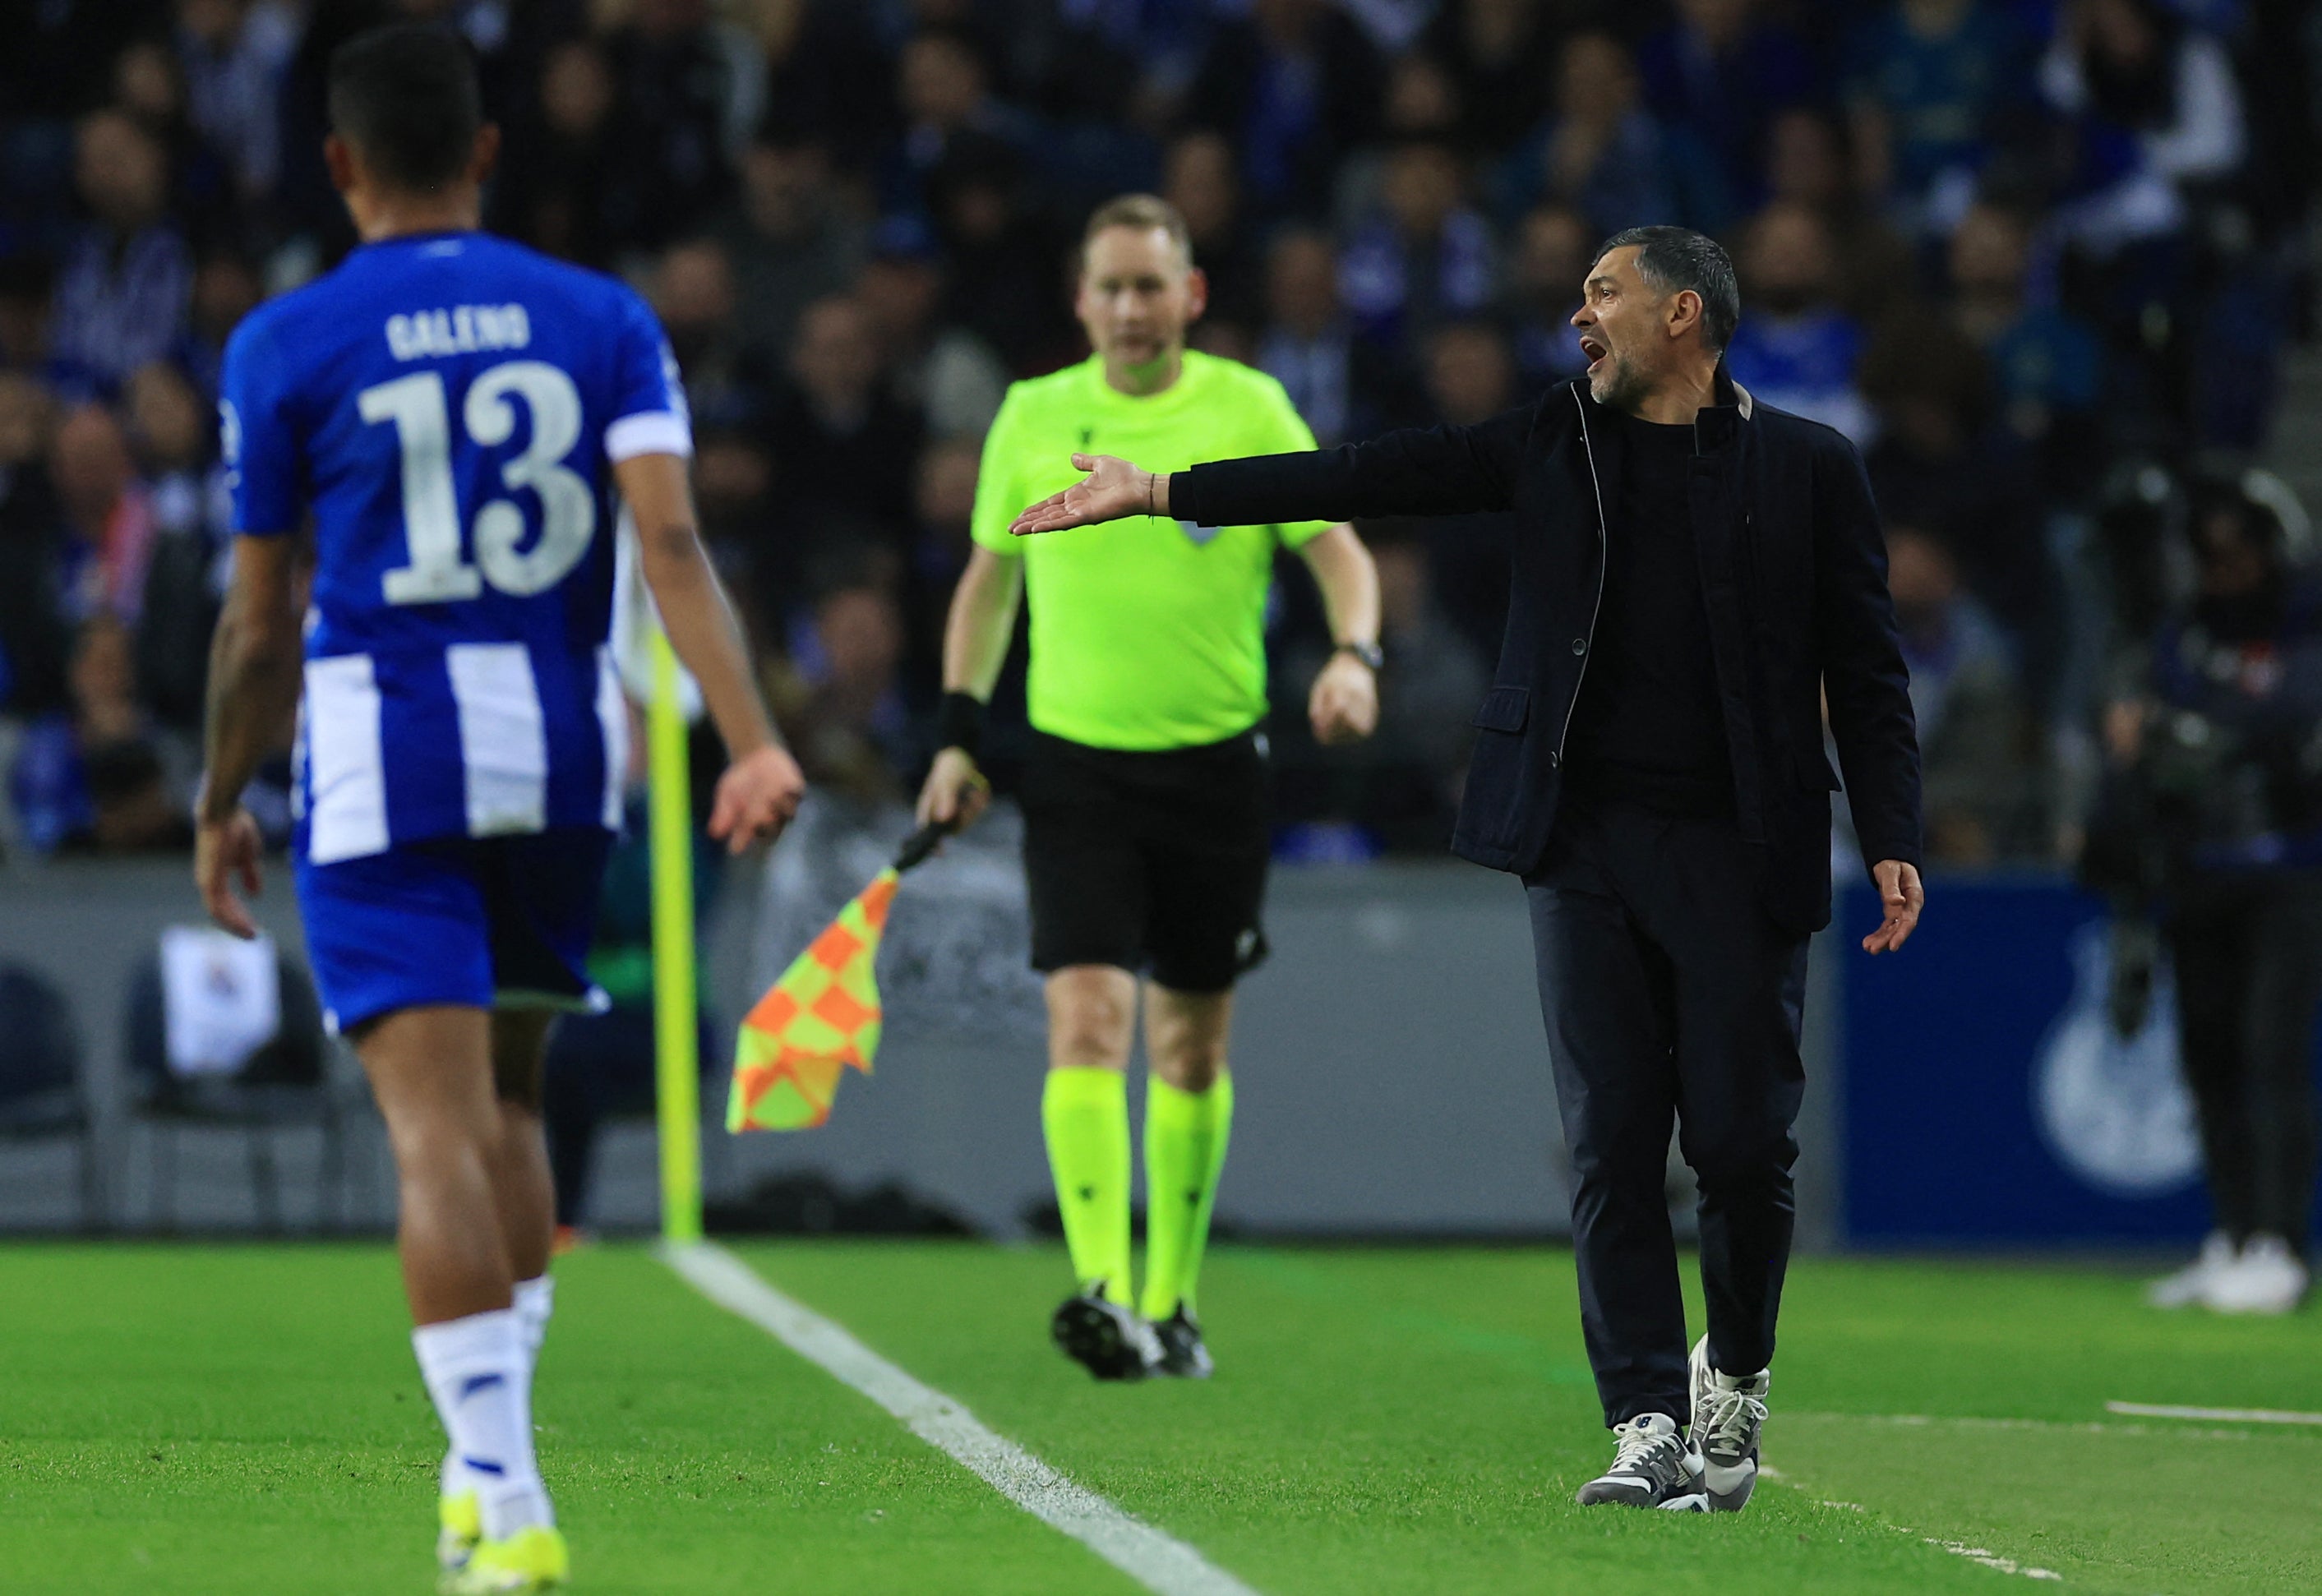 Sergio Conceicao set his side up to frustrate Arsenal